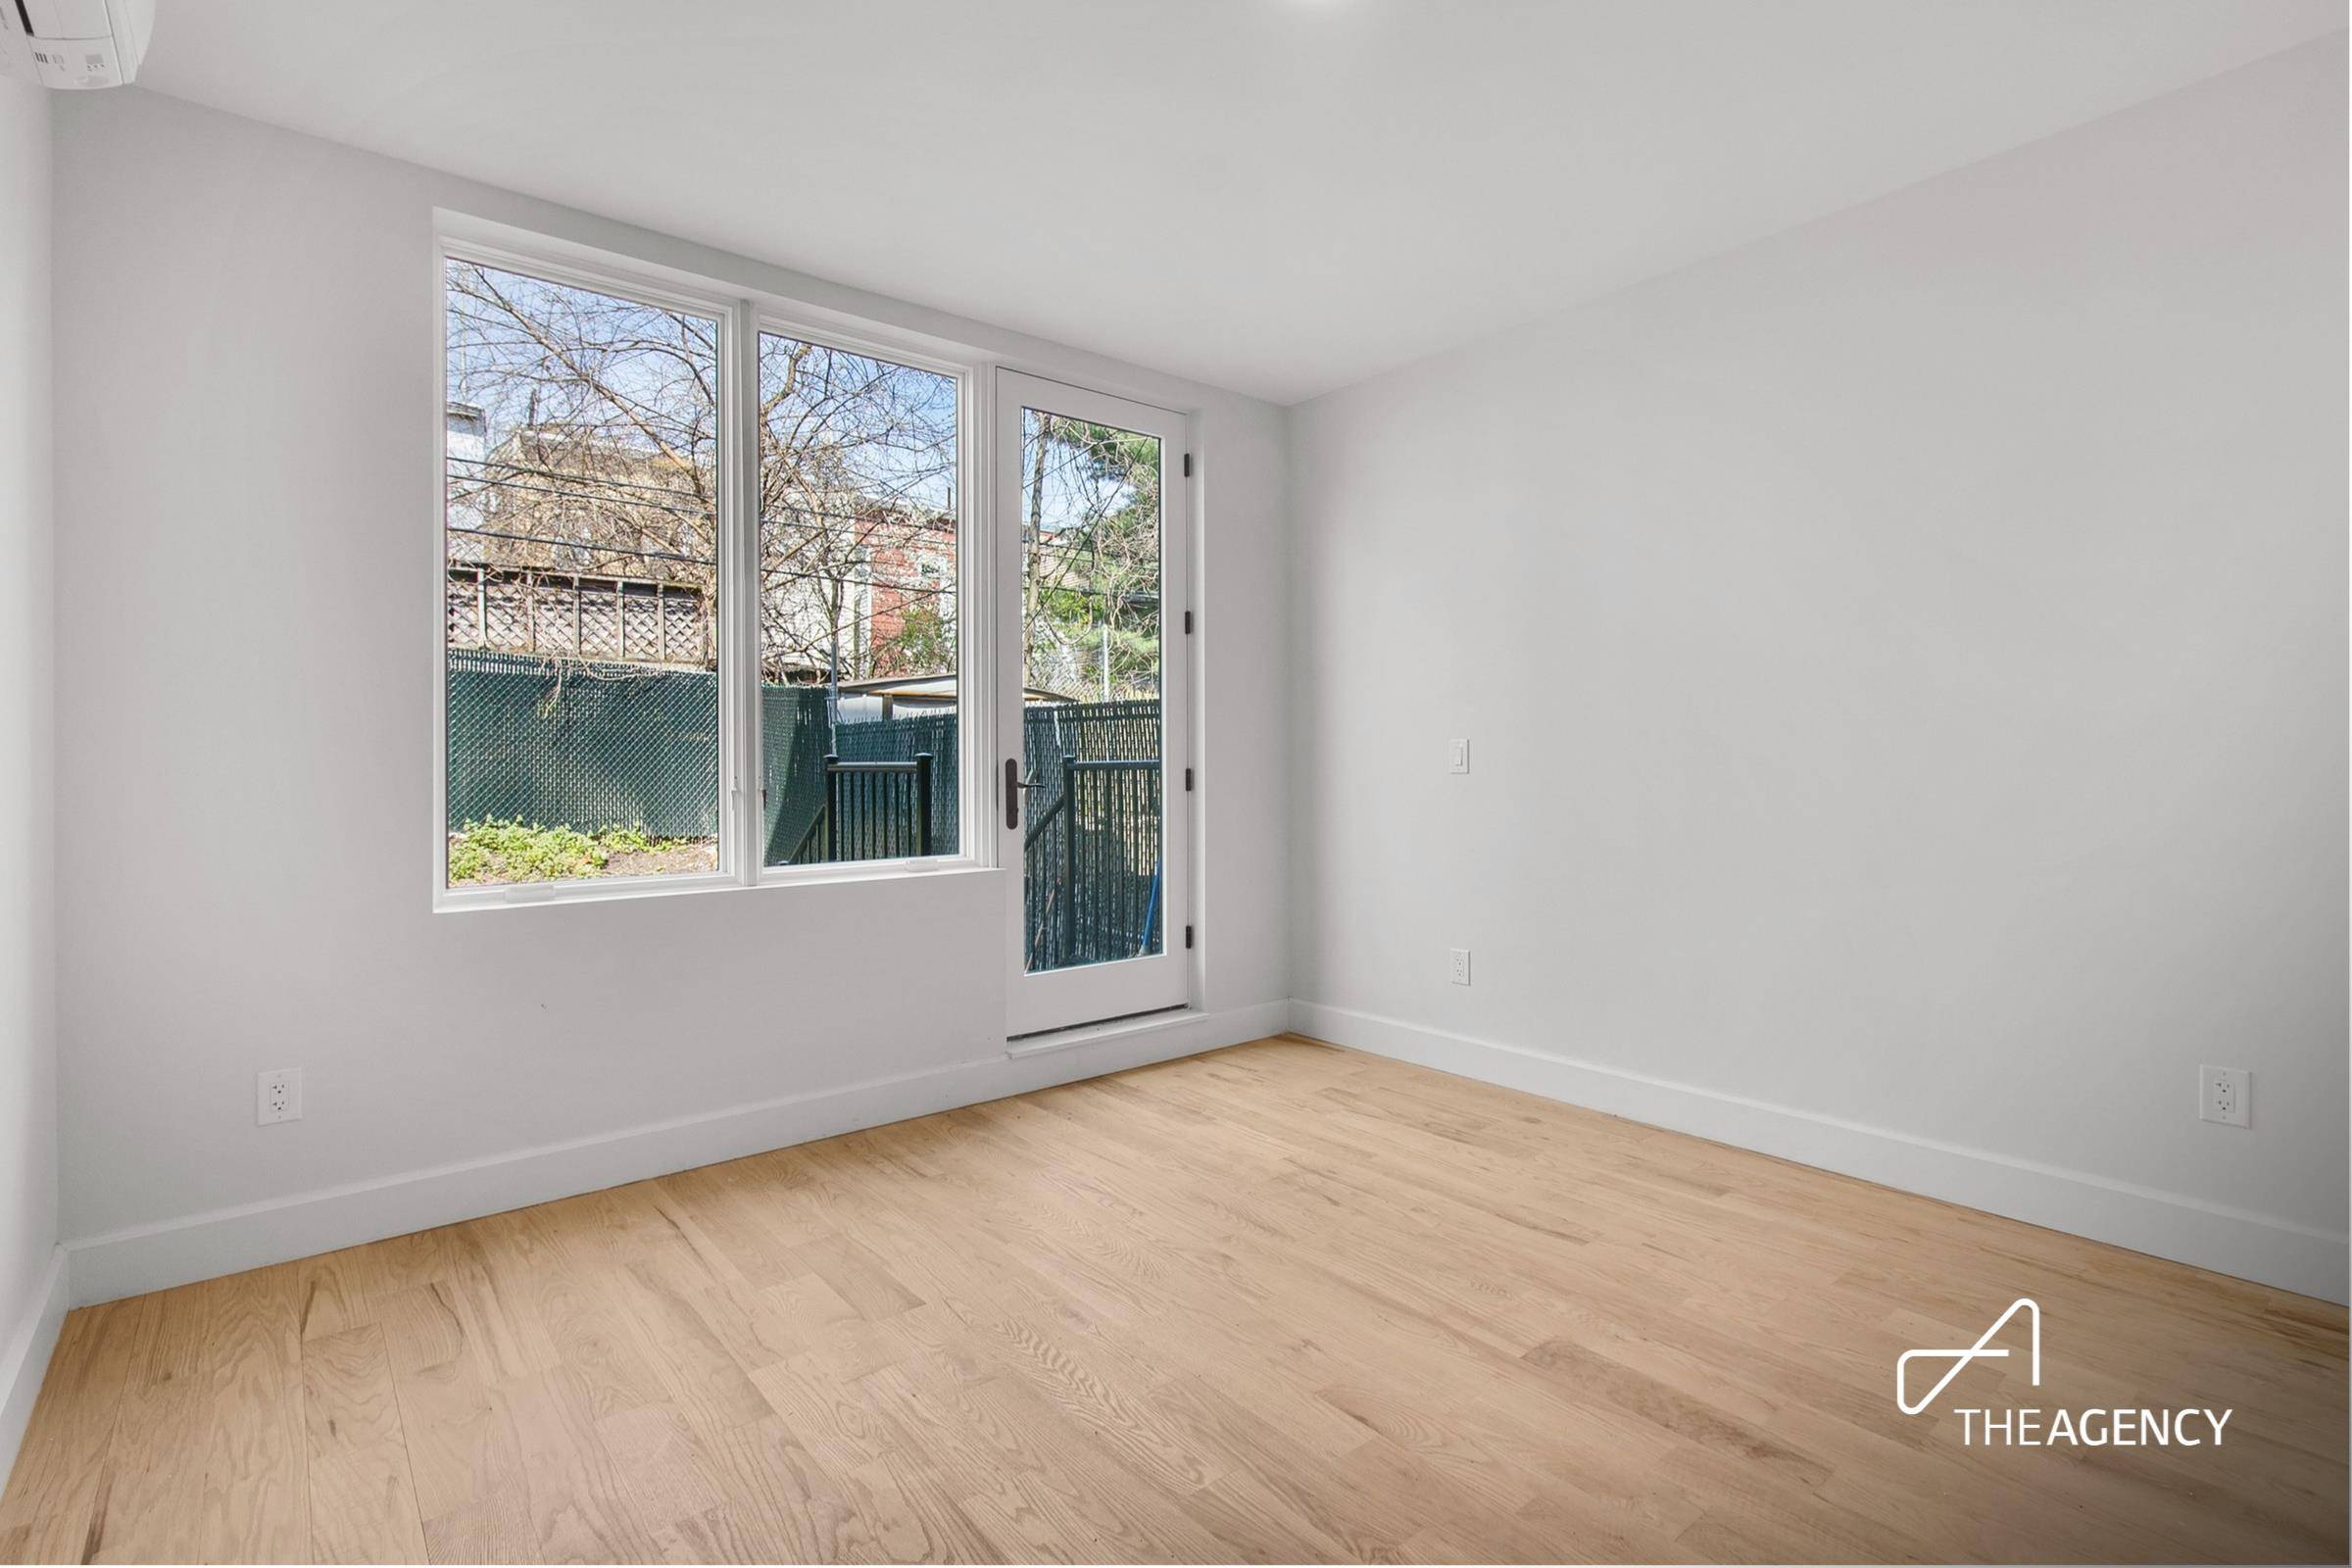 Welcome to 65 Woodbine, where no detail is spared in this stunning 2 Bedroom, 1.